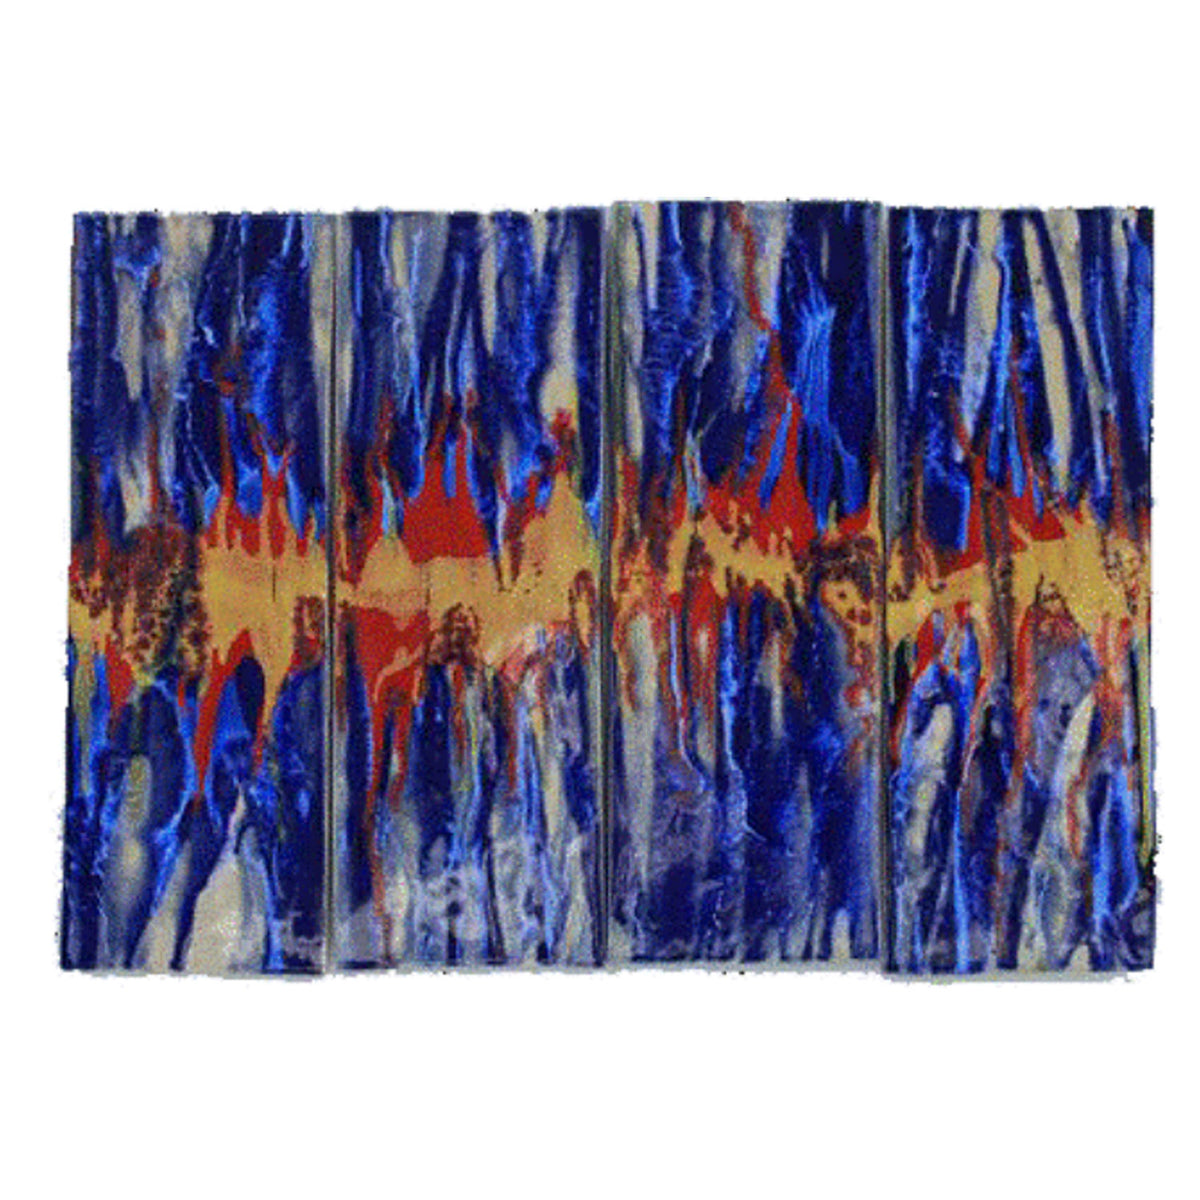 Four Panel Ceramic Abstract Multicolored Wall Hanging Artwork